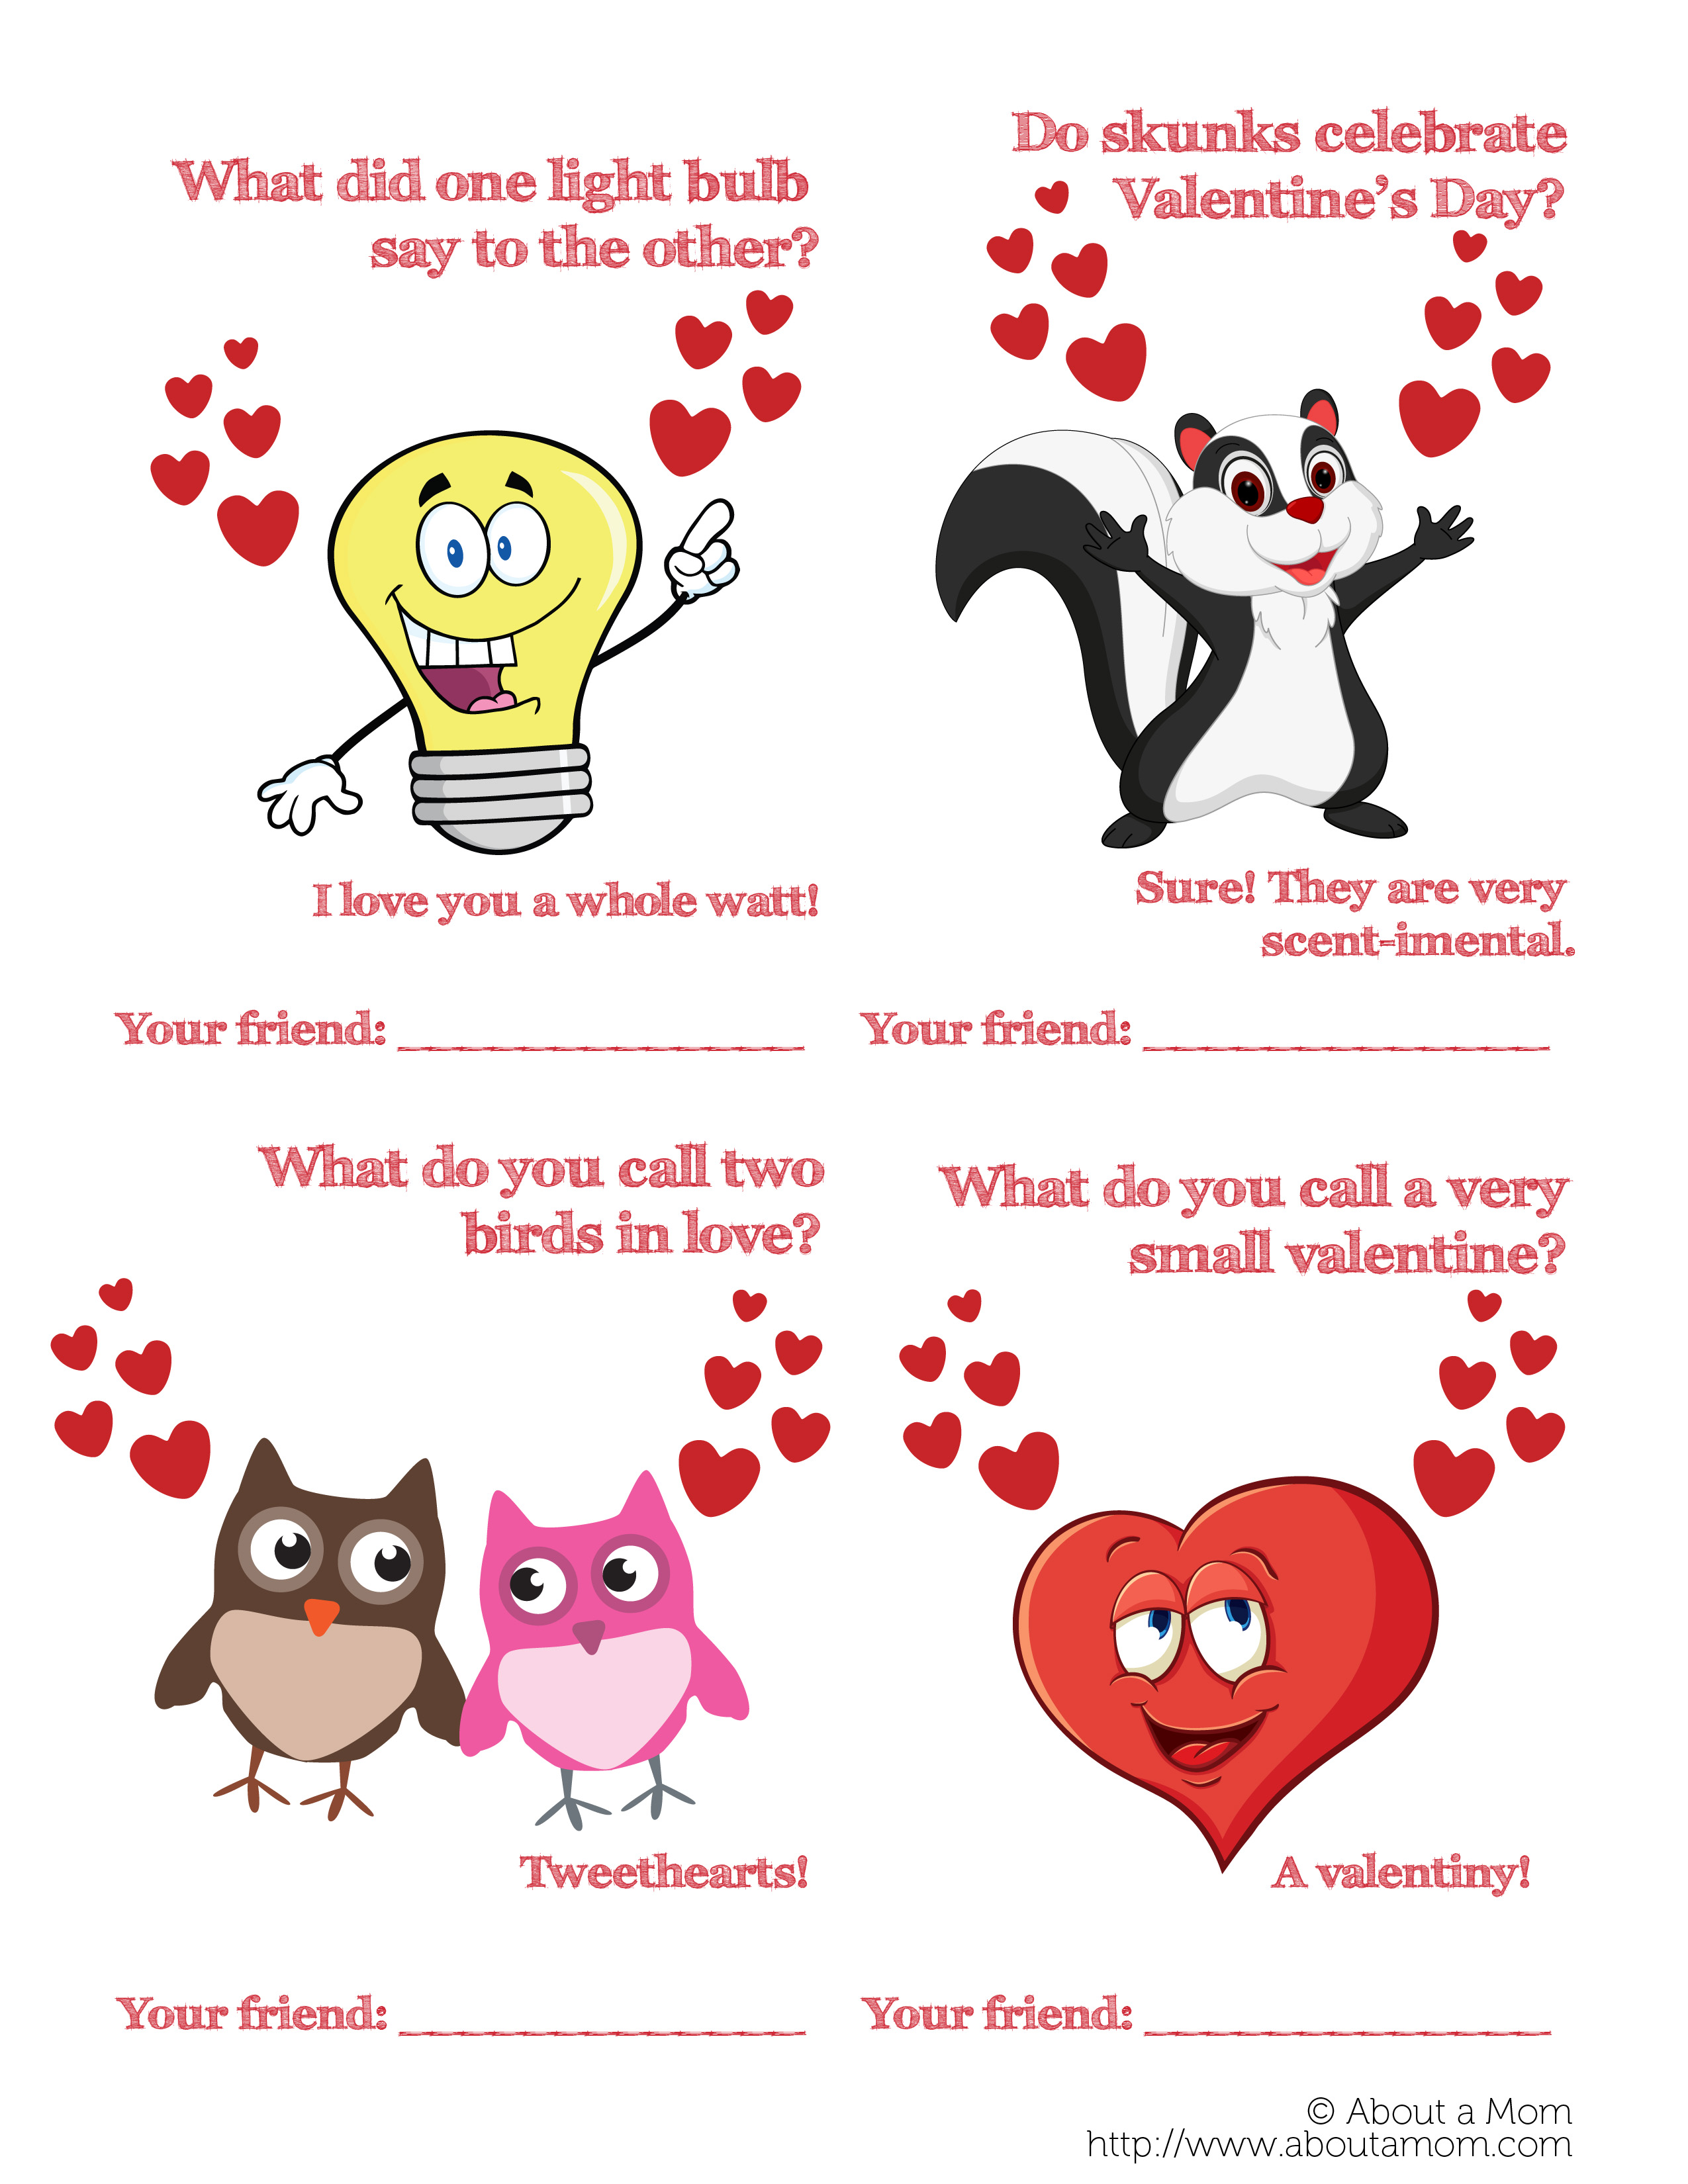 Free Printable Funny Valentine's Day Cards - About a Mom